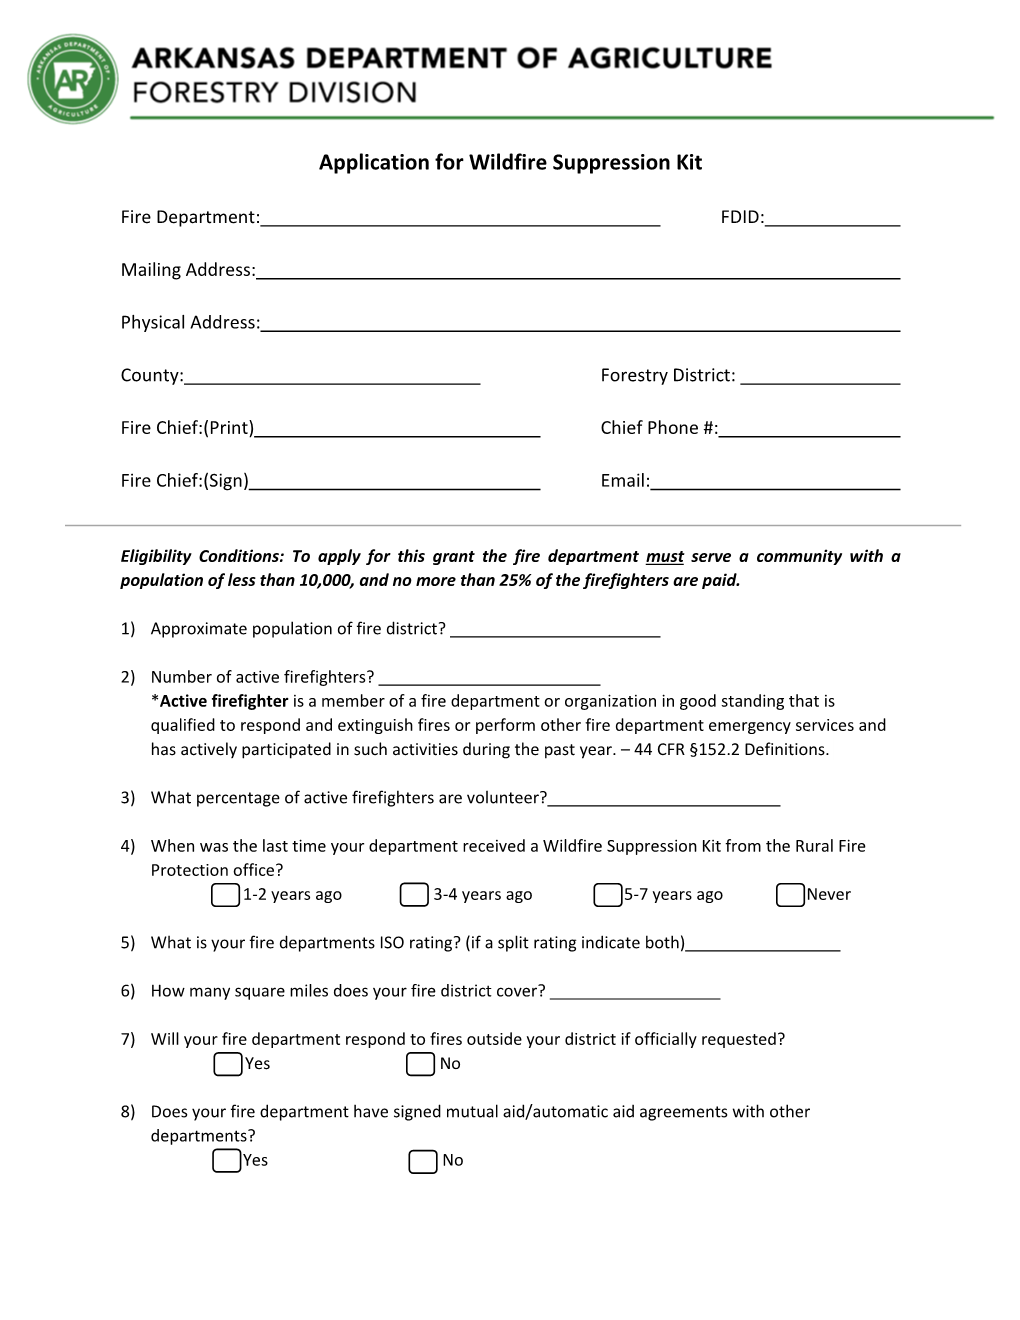 Application for Wildfire Suppression Kit